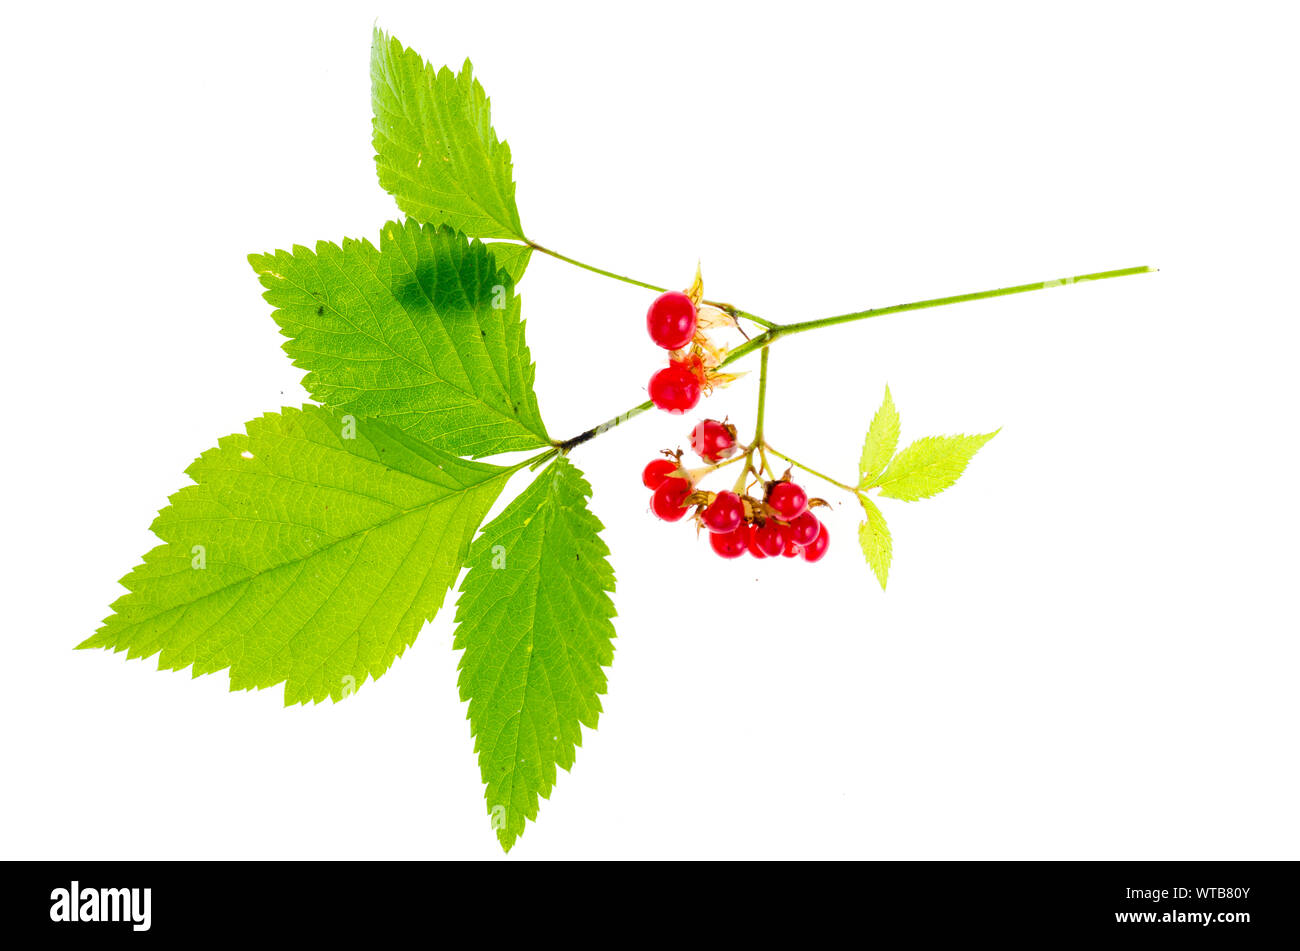 Rubus saxatilis branch with leaves and red berries. Studio Photo Stock Photo